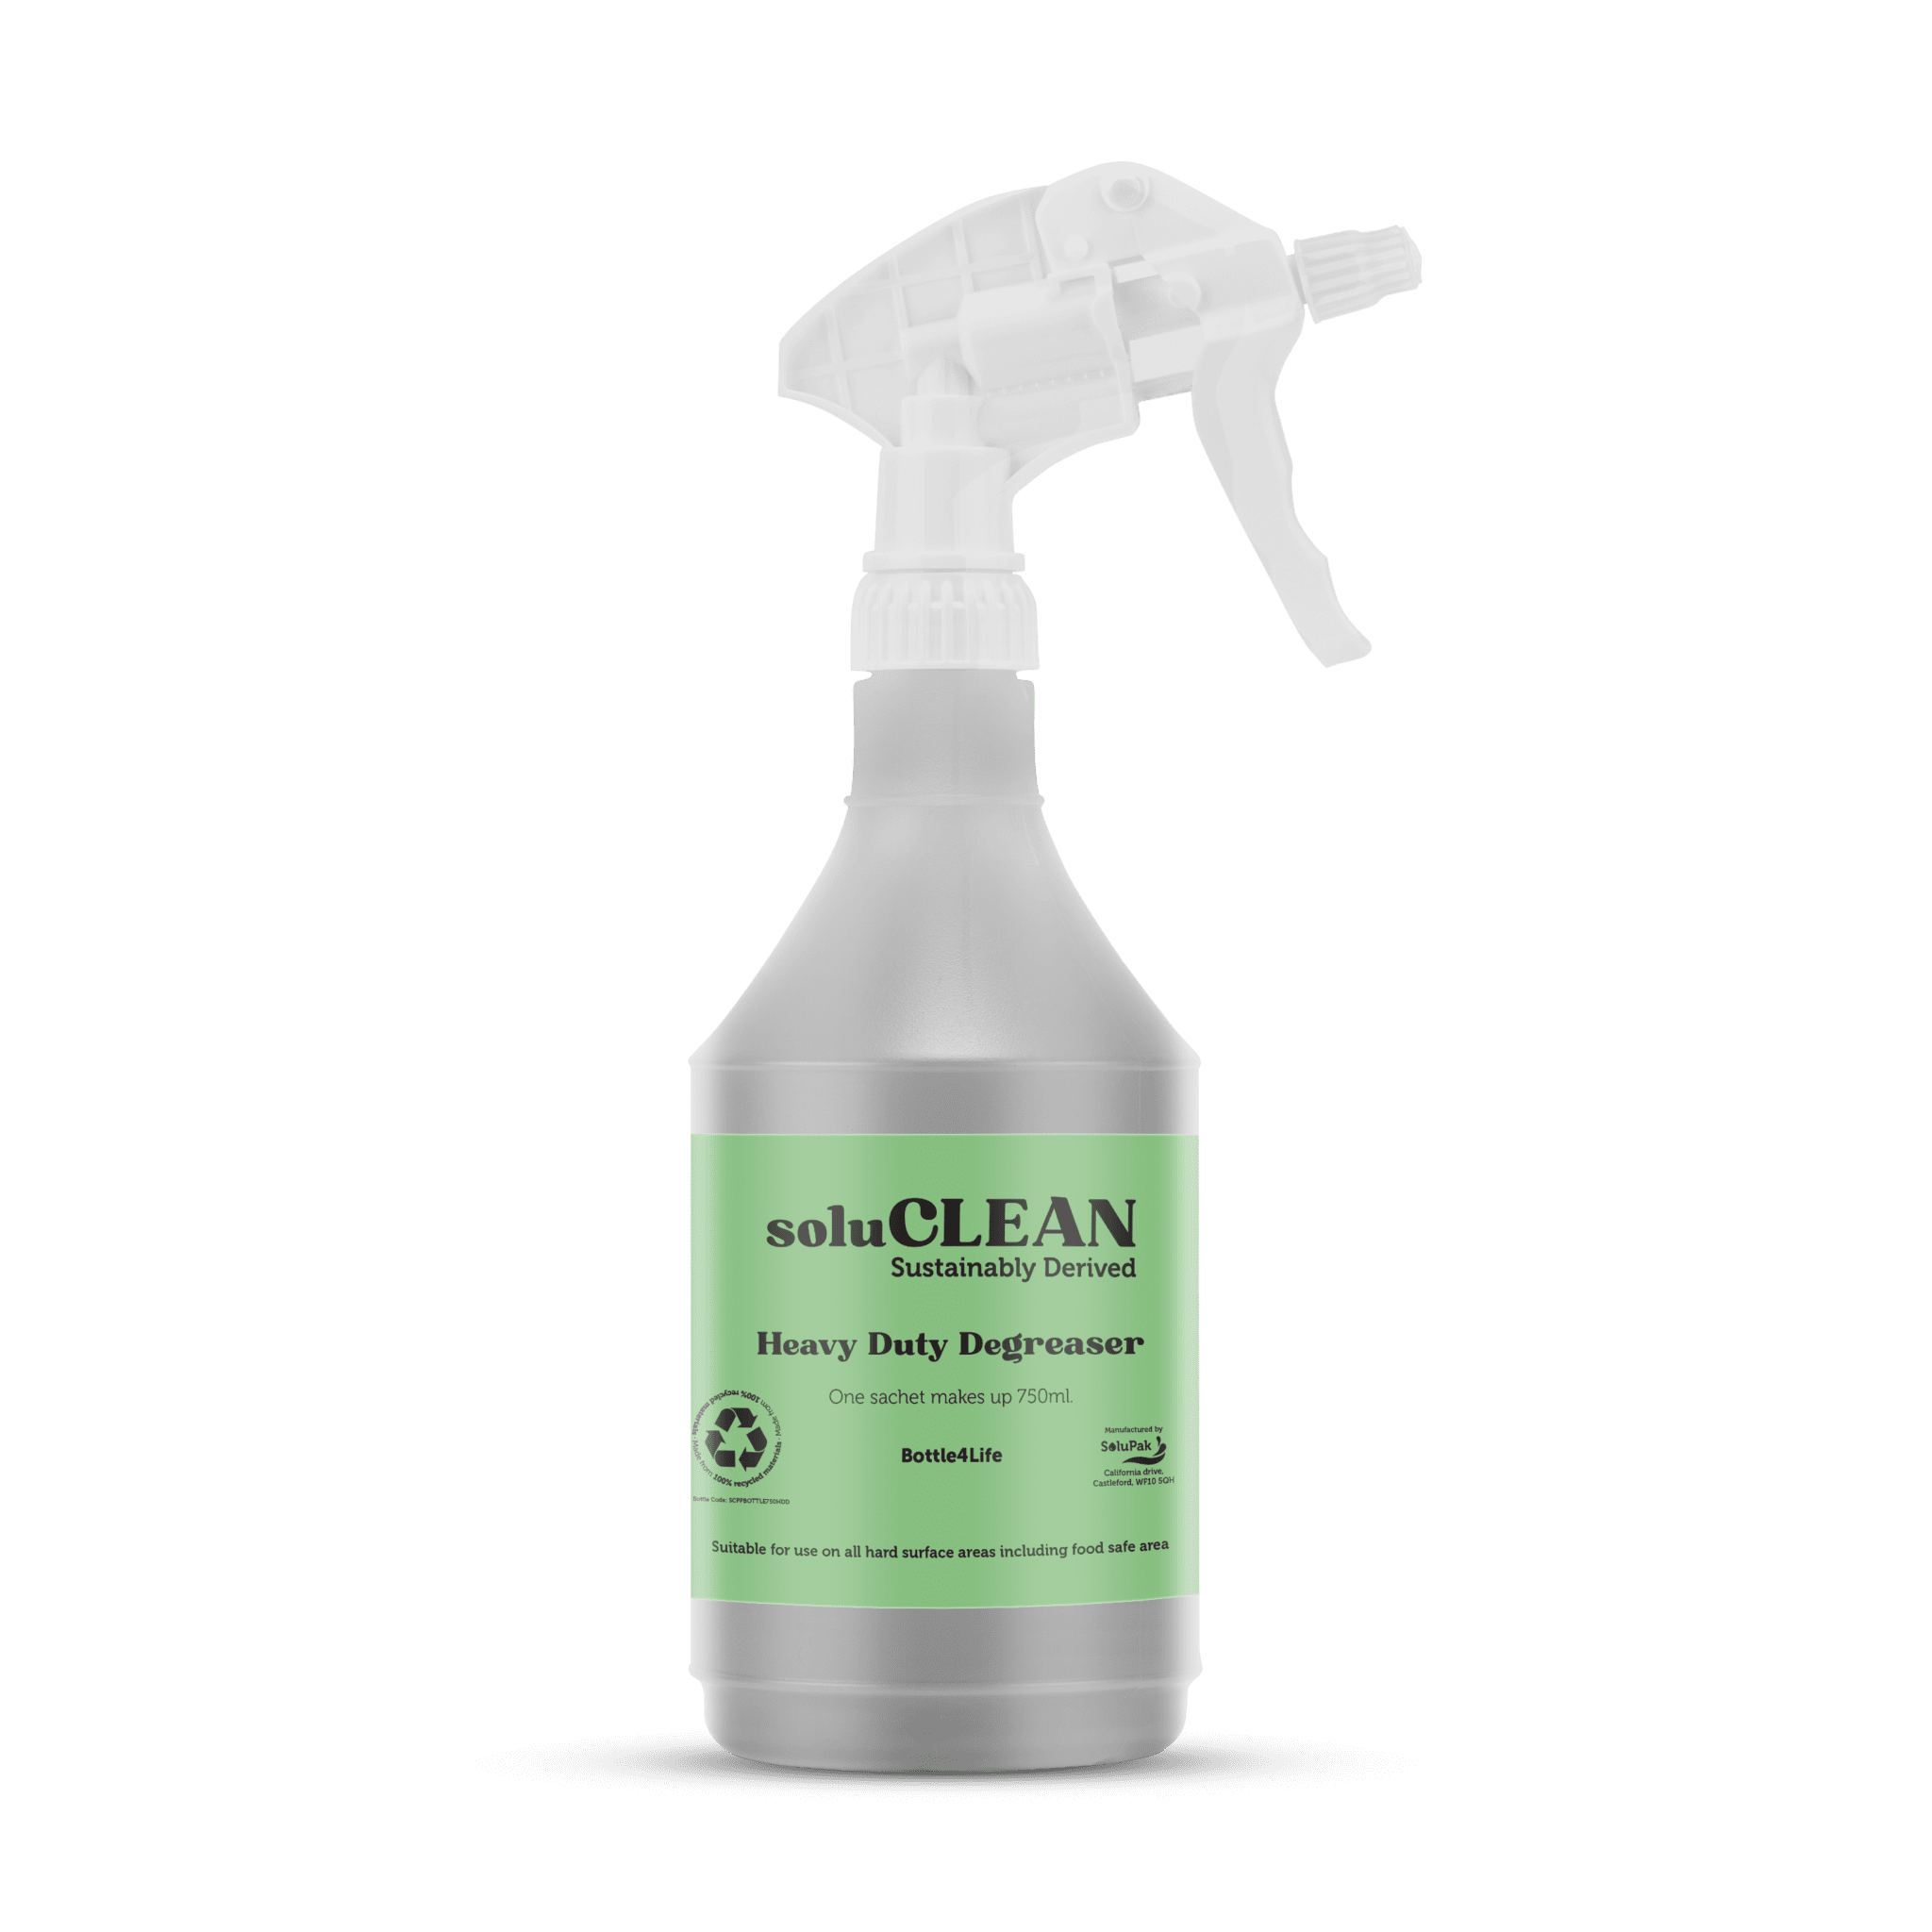 Heavy duty degreaser (Transparent background)